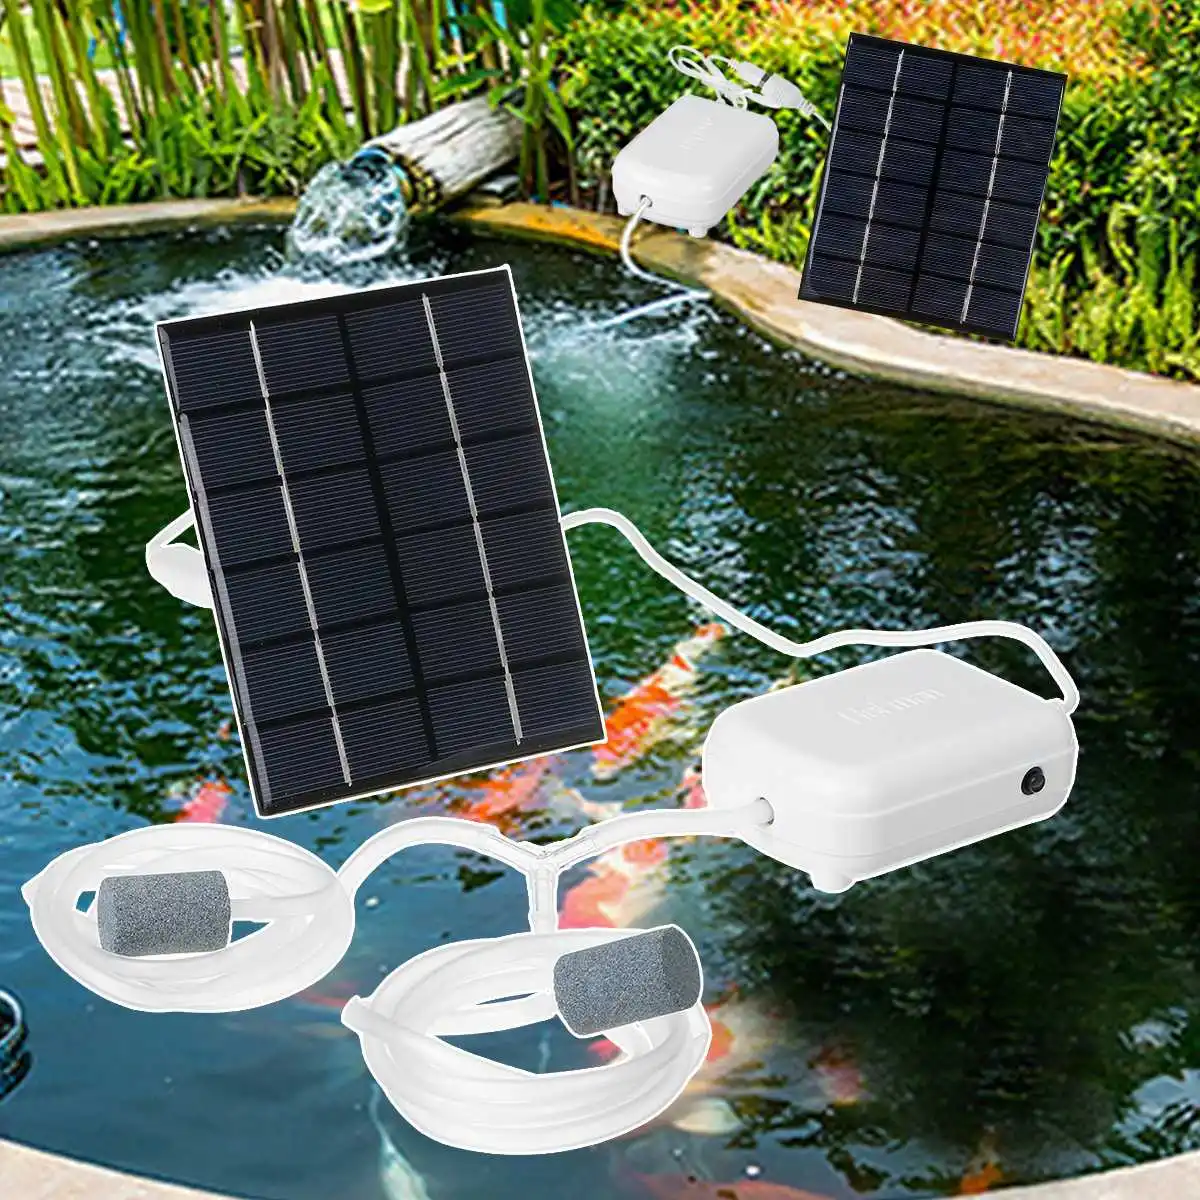 Solar Air Pump Kit Inserting Ground Water Air Pump Oxygenator Solar Aerator With Oxygen Hoses Air Stone For Pond Fish Garden